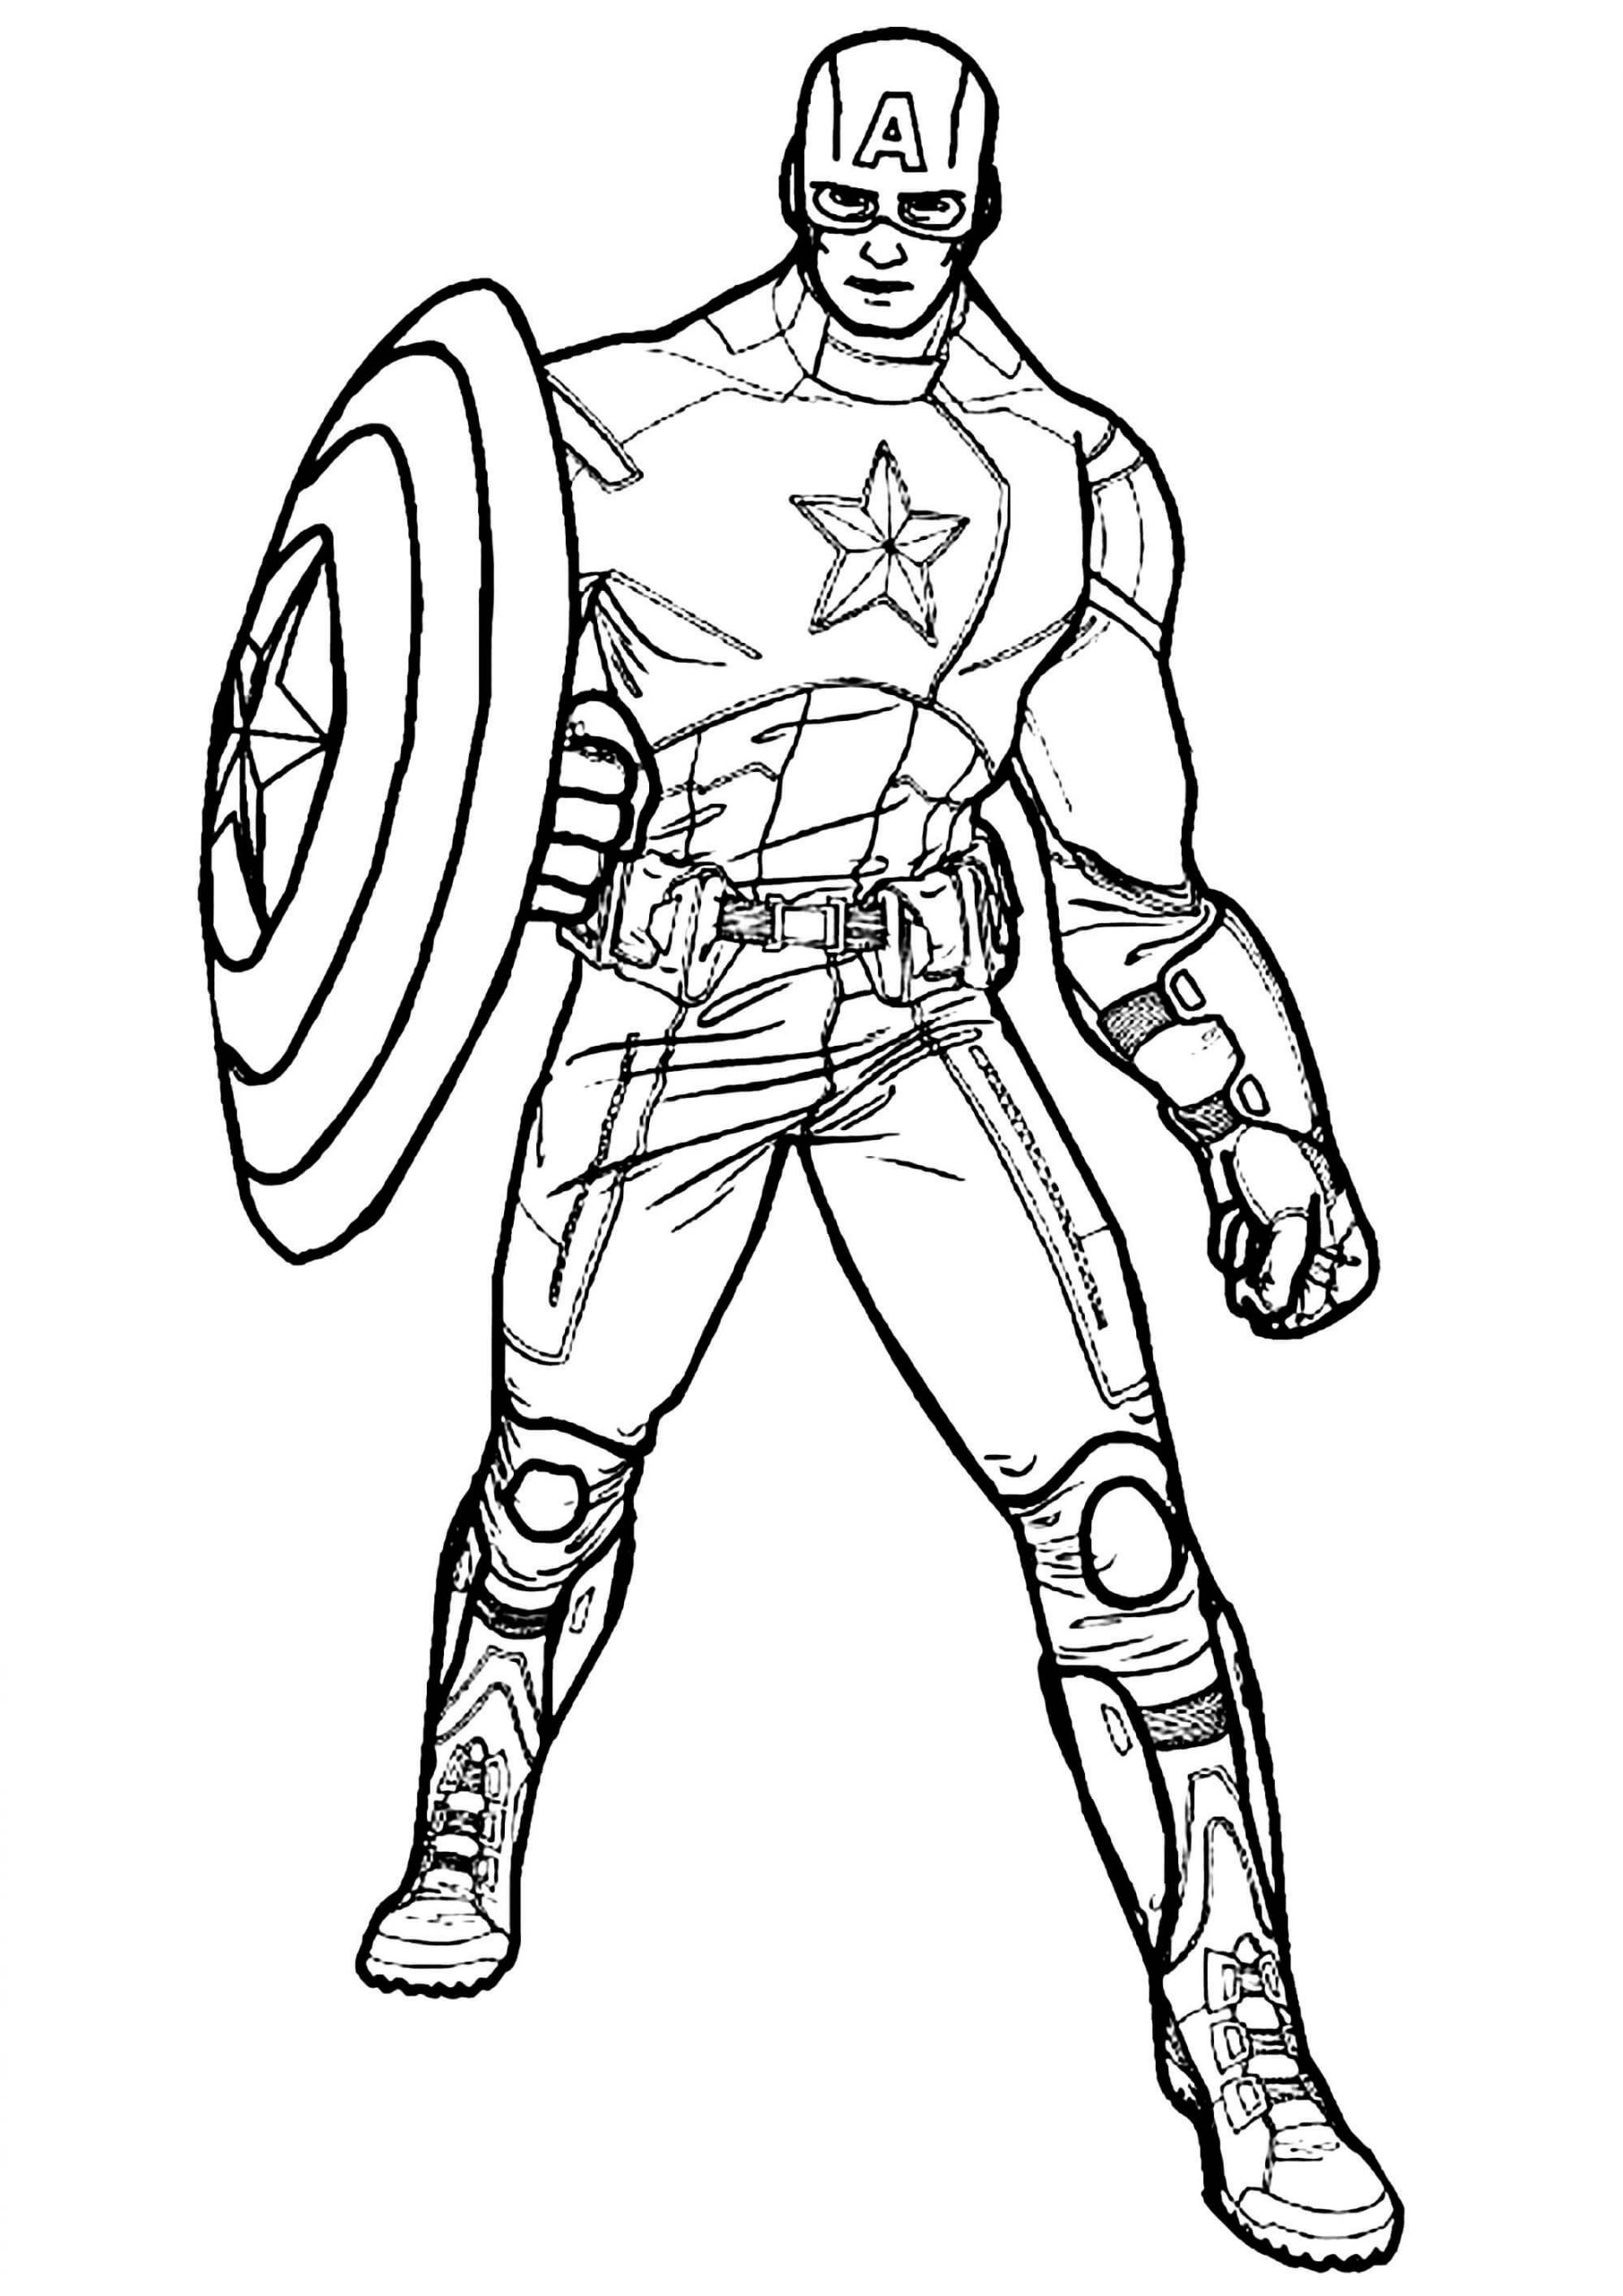 Captain America 1 coloring page